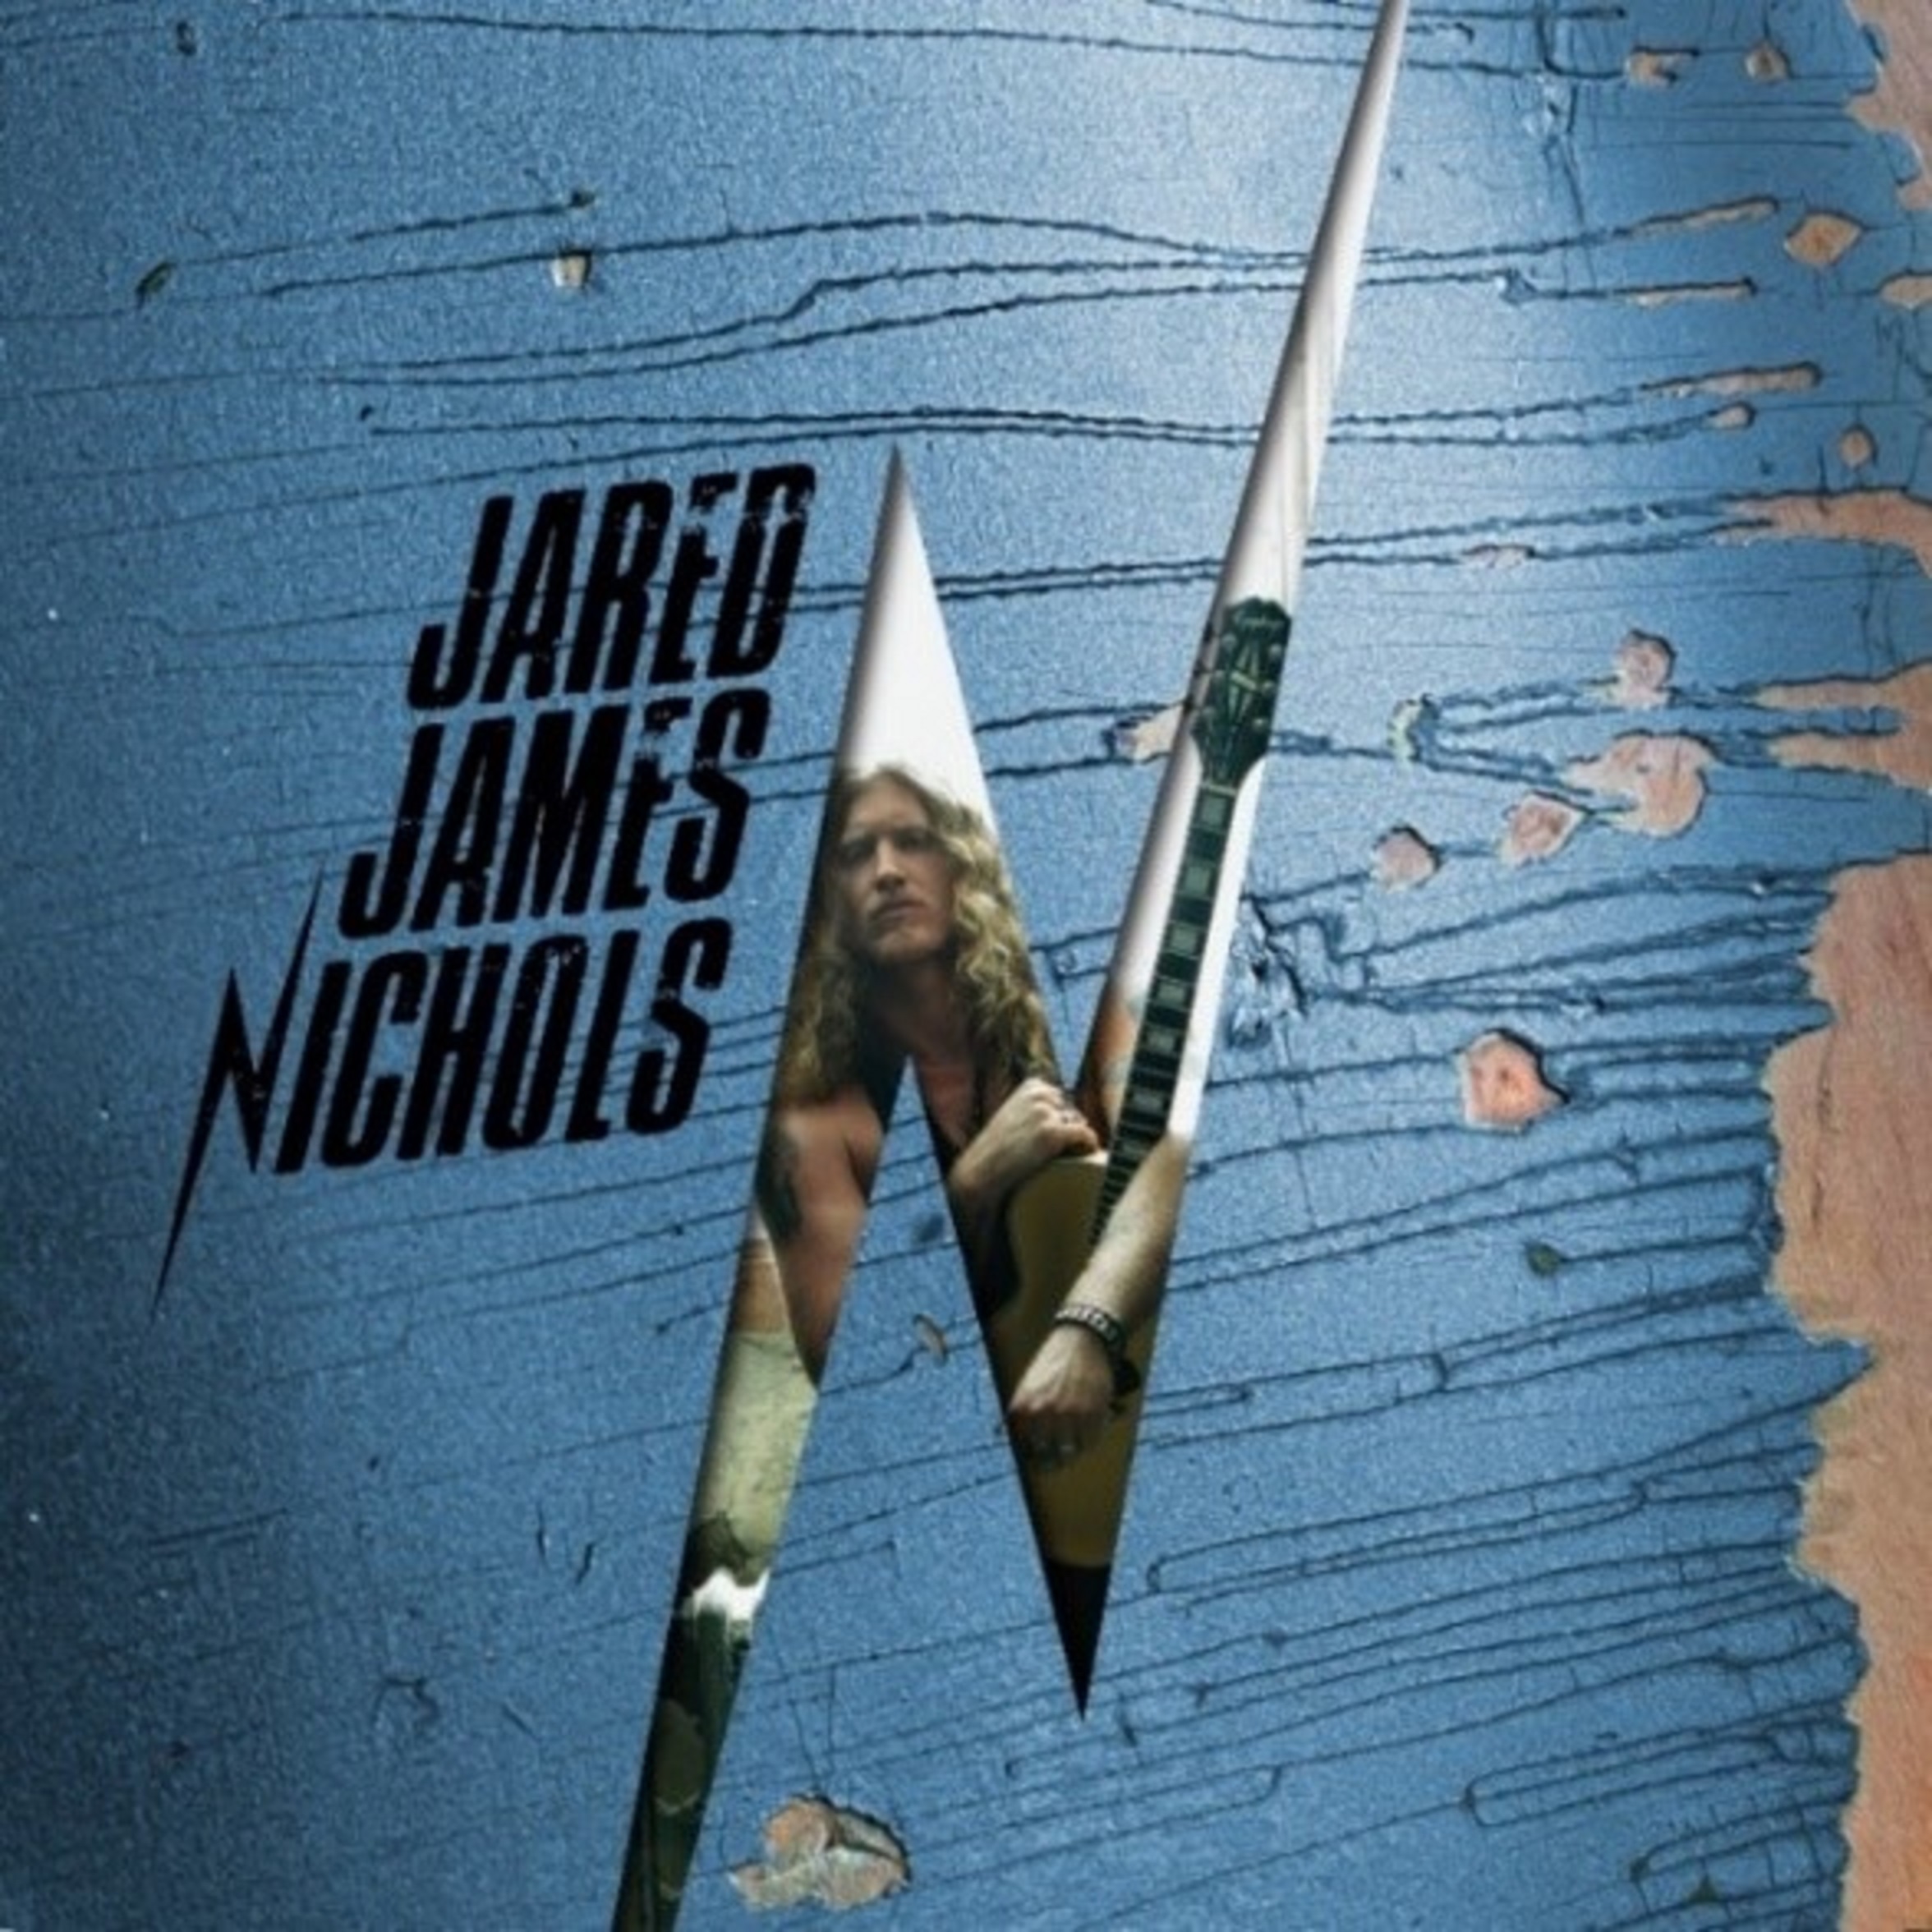 JARED JAMES NICHOLS NEW SINGLE: “EASY COME, EASY GO” RELEASED 24 MAY 2023